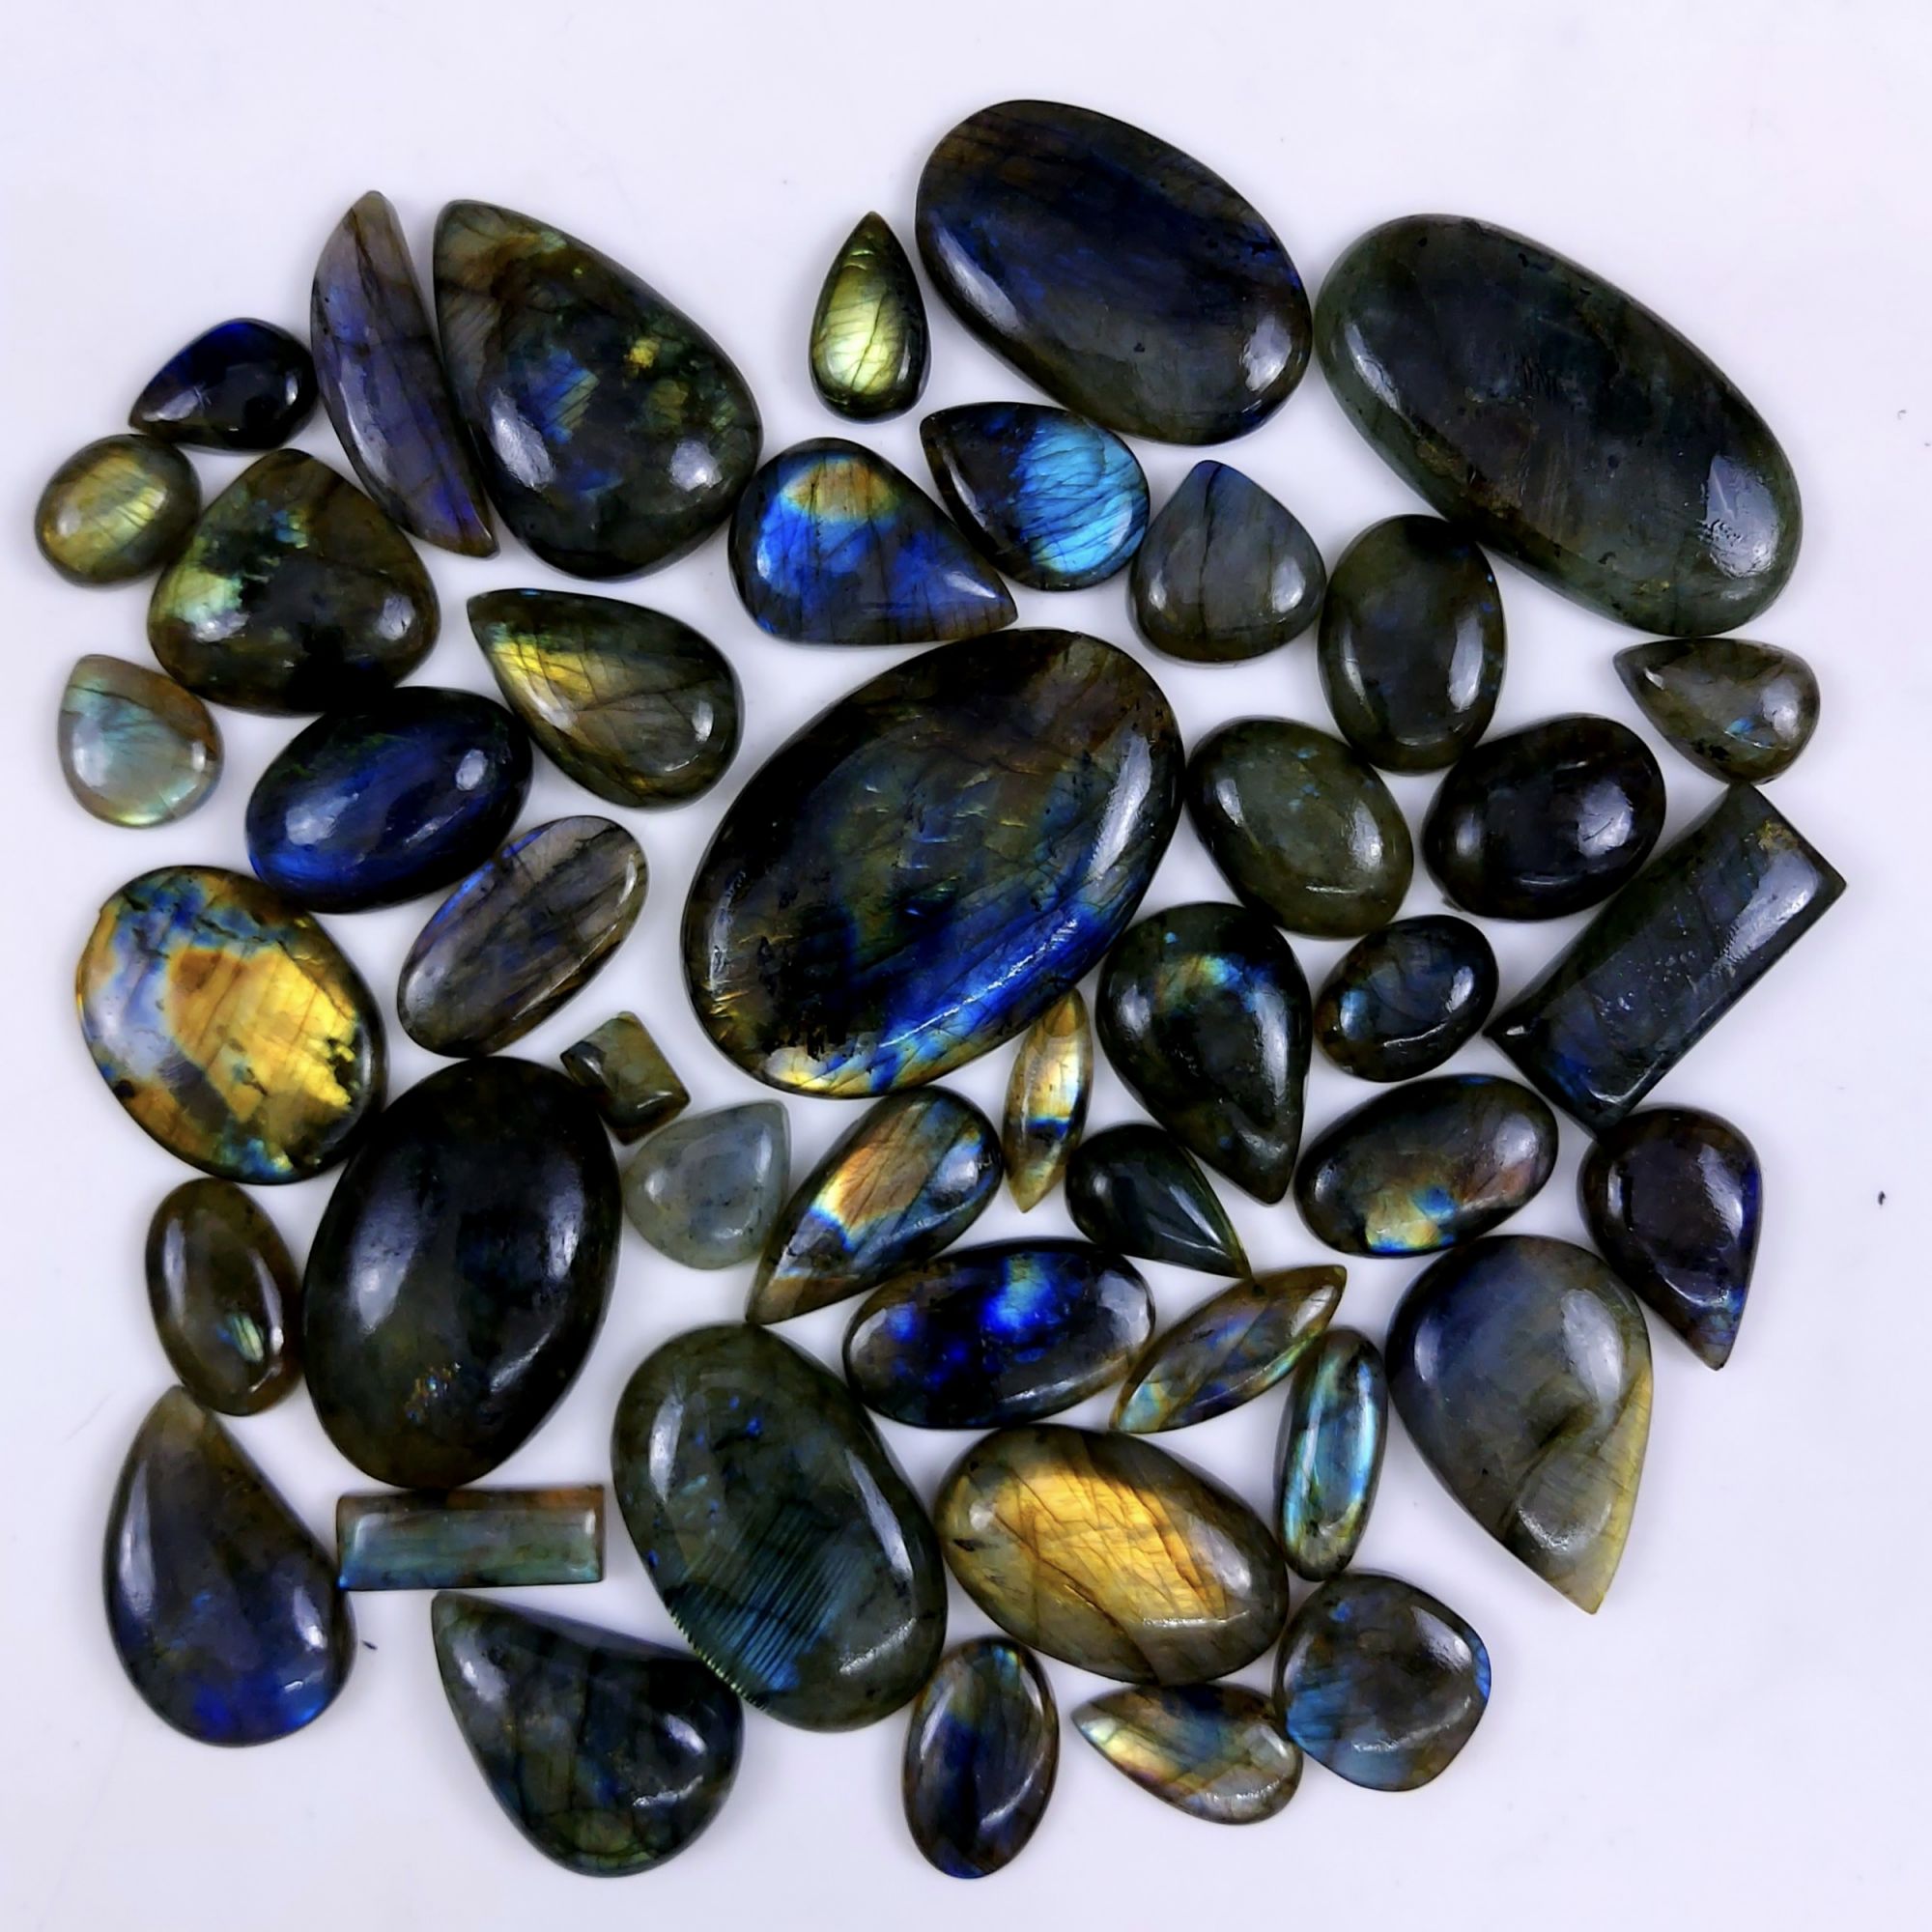 44pc 1567Cts Labradorite Cabochon Multifire Healing Crystal For Jewelry Supplies, Labradorite Necklace Handmade Wire Wrapped Gemstone Pendant 55x27 20x14mm#6333